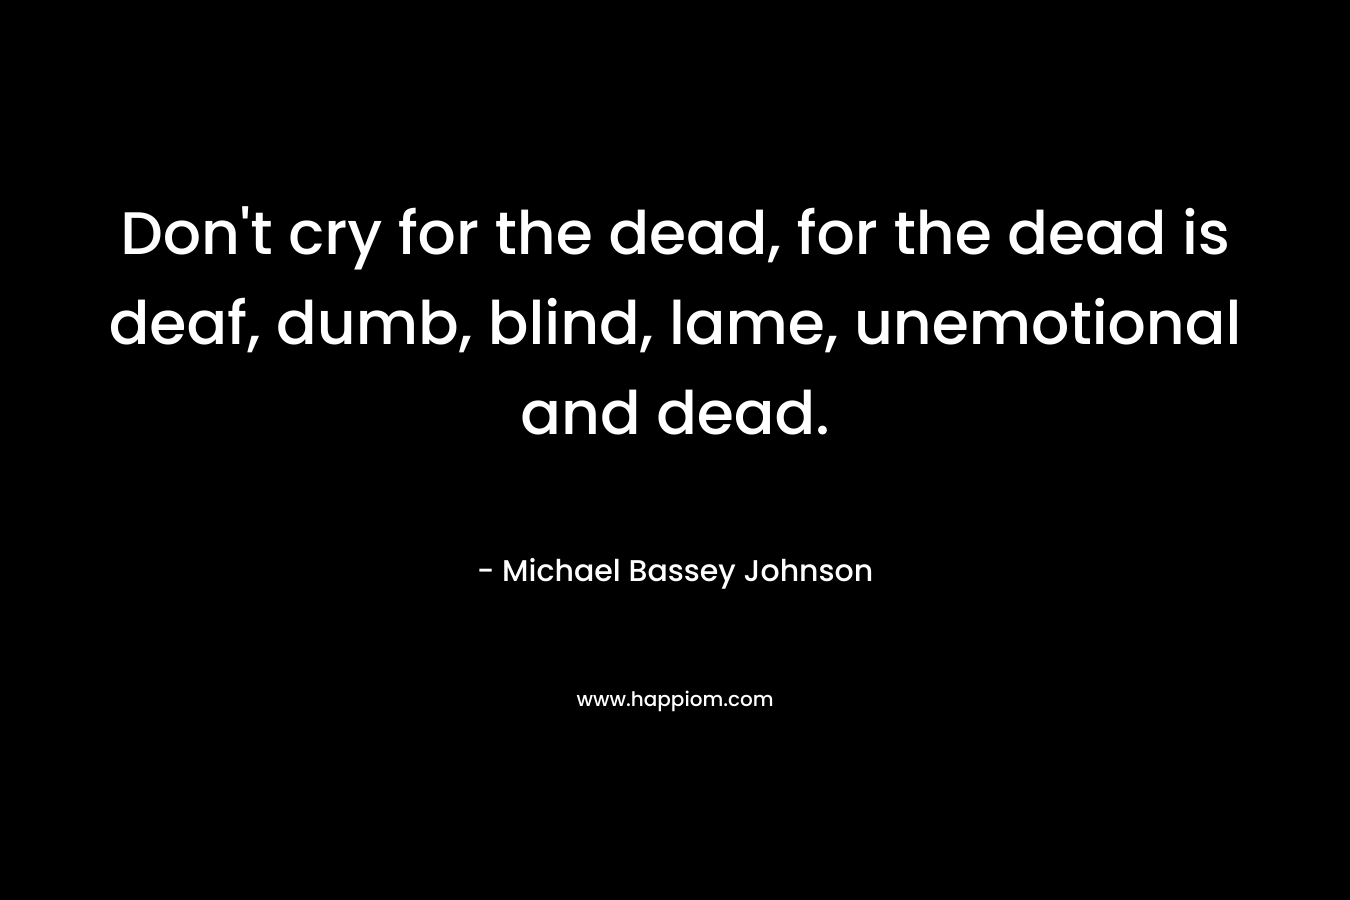 Don't cry for the dead, for the dead is deaf, dumb, blind, lame, unemotional and dead.